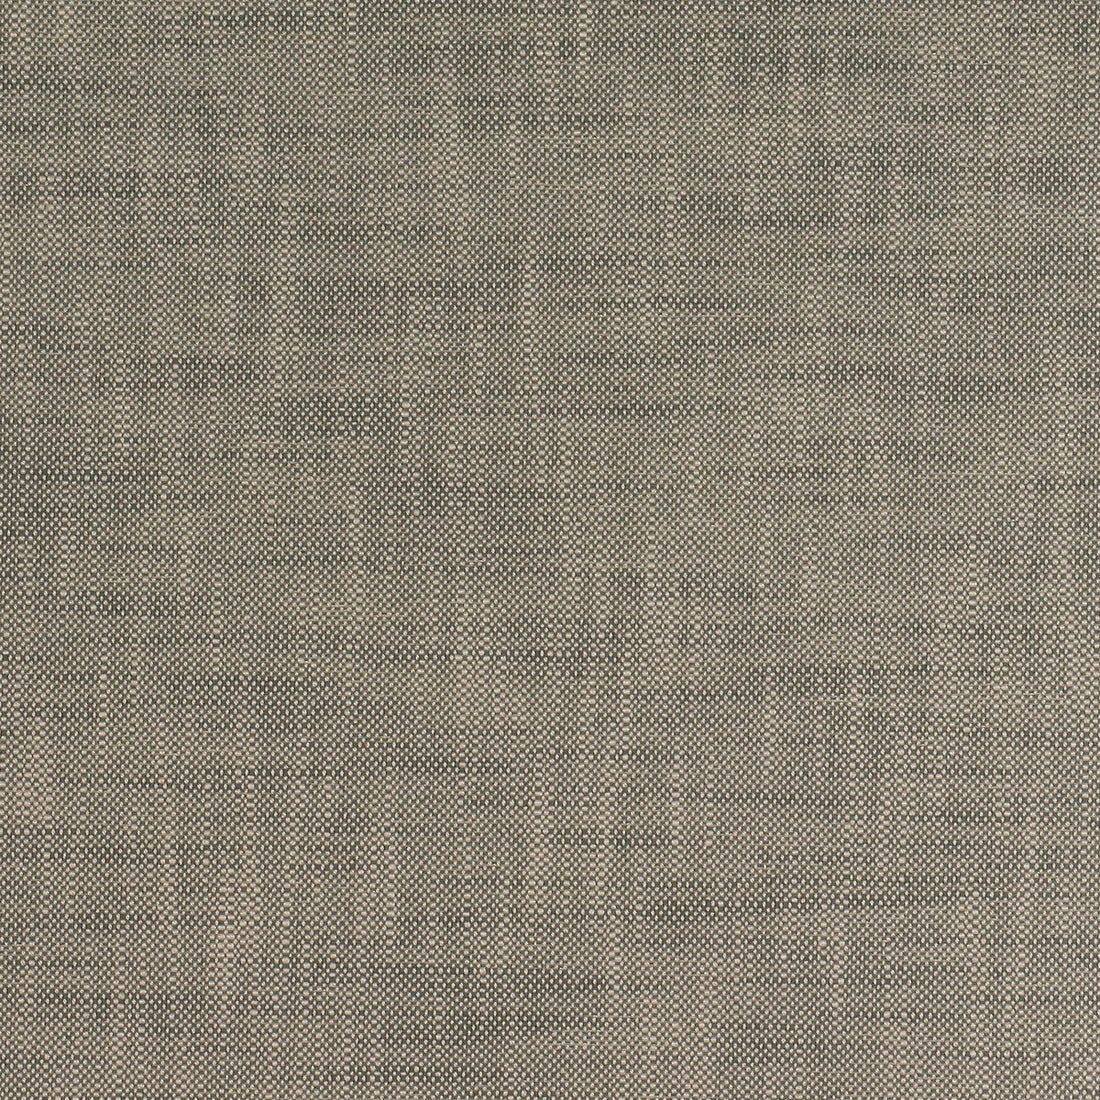 Kravet Smart fabric in 35517-21 color - pattern 35517.21.0 - by Kravet Smart in the Inside Out Performance Fabrics collection